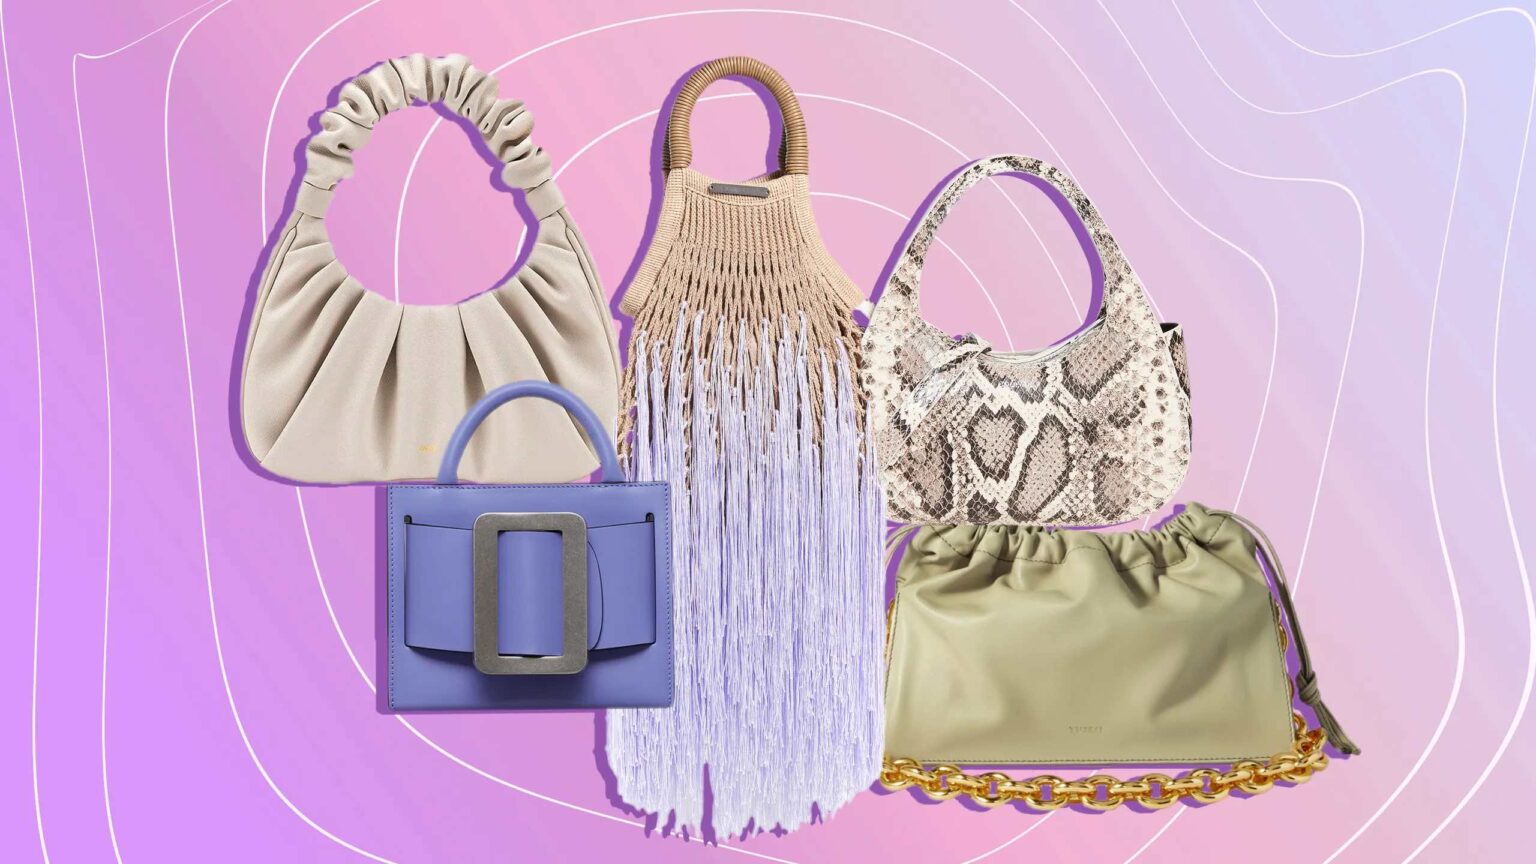 Choosing the right kind of bag for your everyday needs can be a major challenge. Use this guide to look fashionable while still being functional.